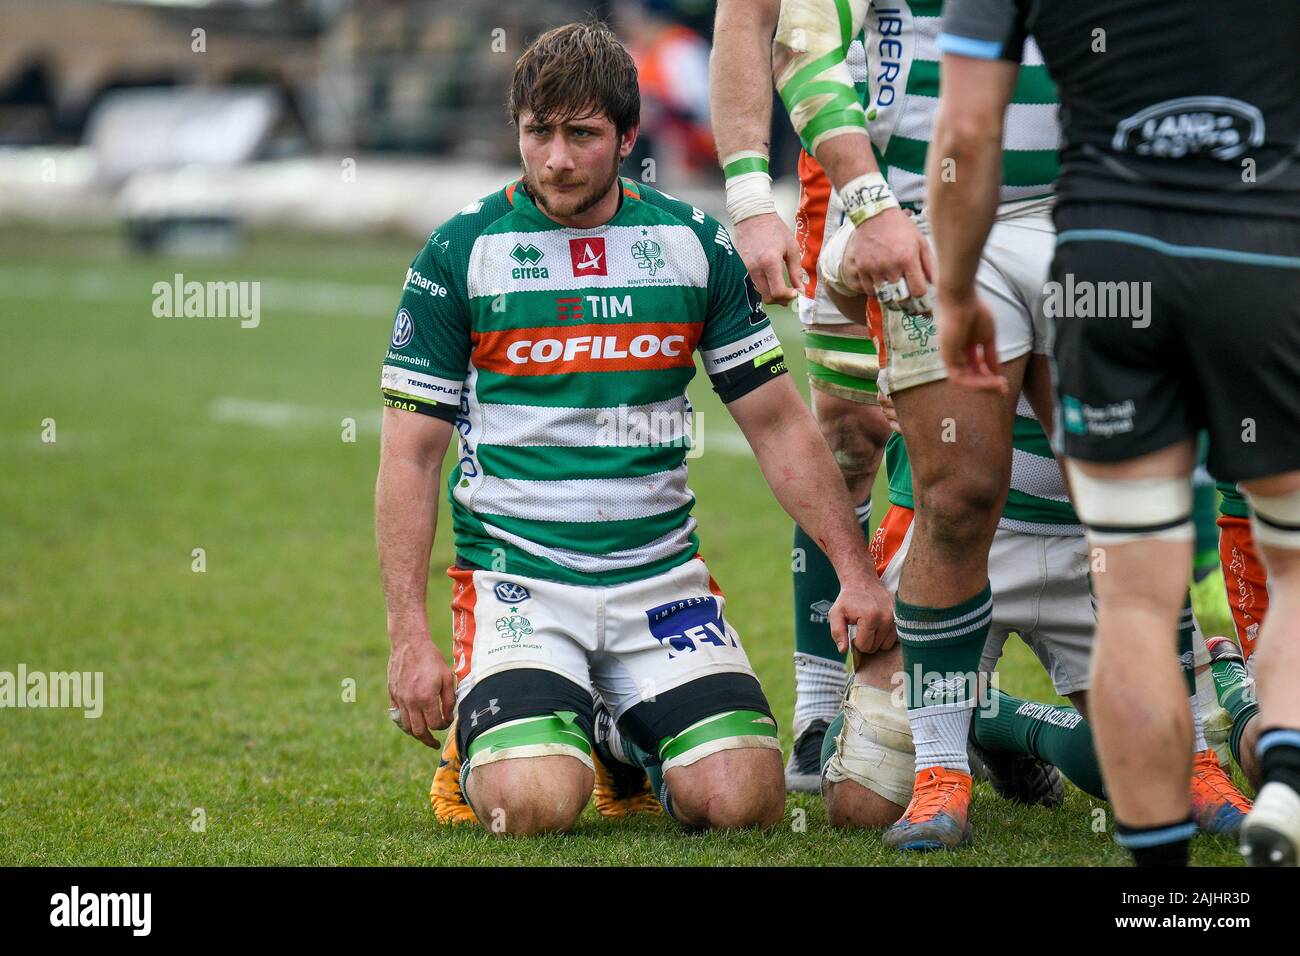 Treviso, Italy. January 4, 2020, Treviso, Italy: giovanni pettinelli  (treviso)during Benetton Treviso vs Glasgow Warriors, Rugby Guinness Pro 14  in Treviso, Italy, January 04 2020 - LPS/Ettore Griffoni Credit: Ettore  Griffoni/LPS/ZUMA Wire/Alamy